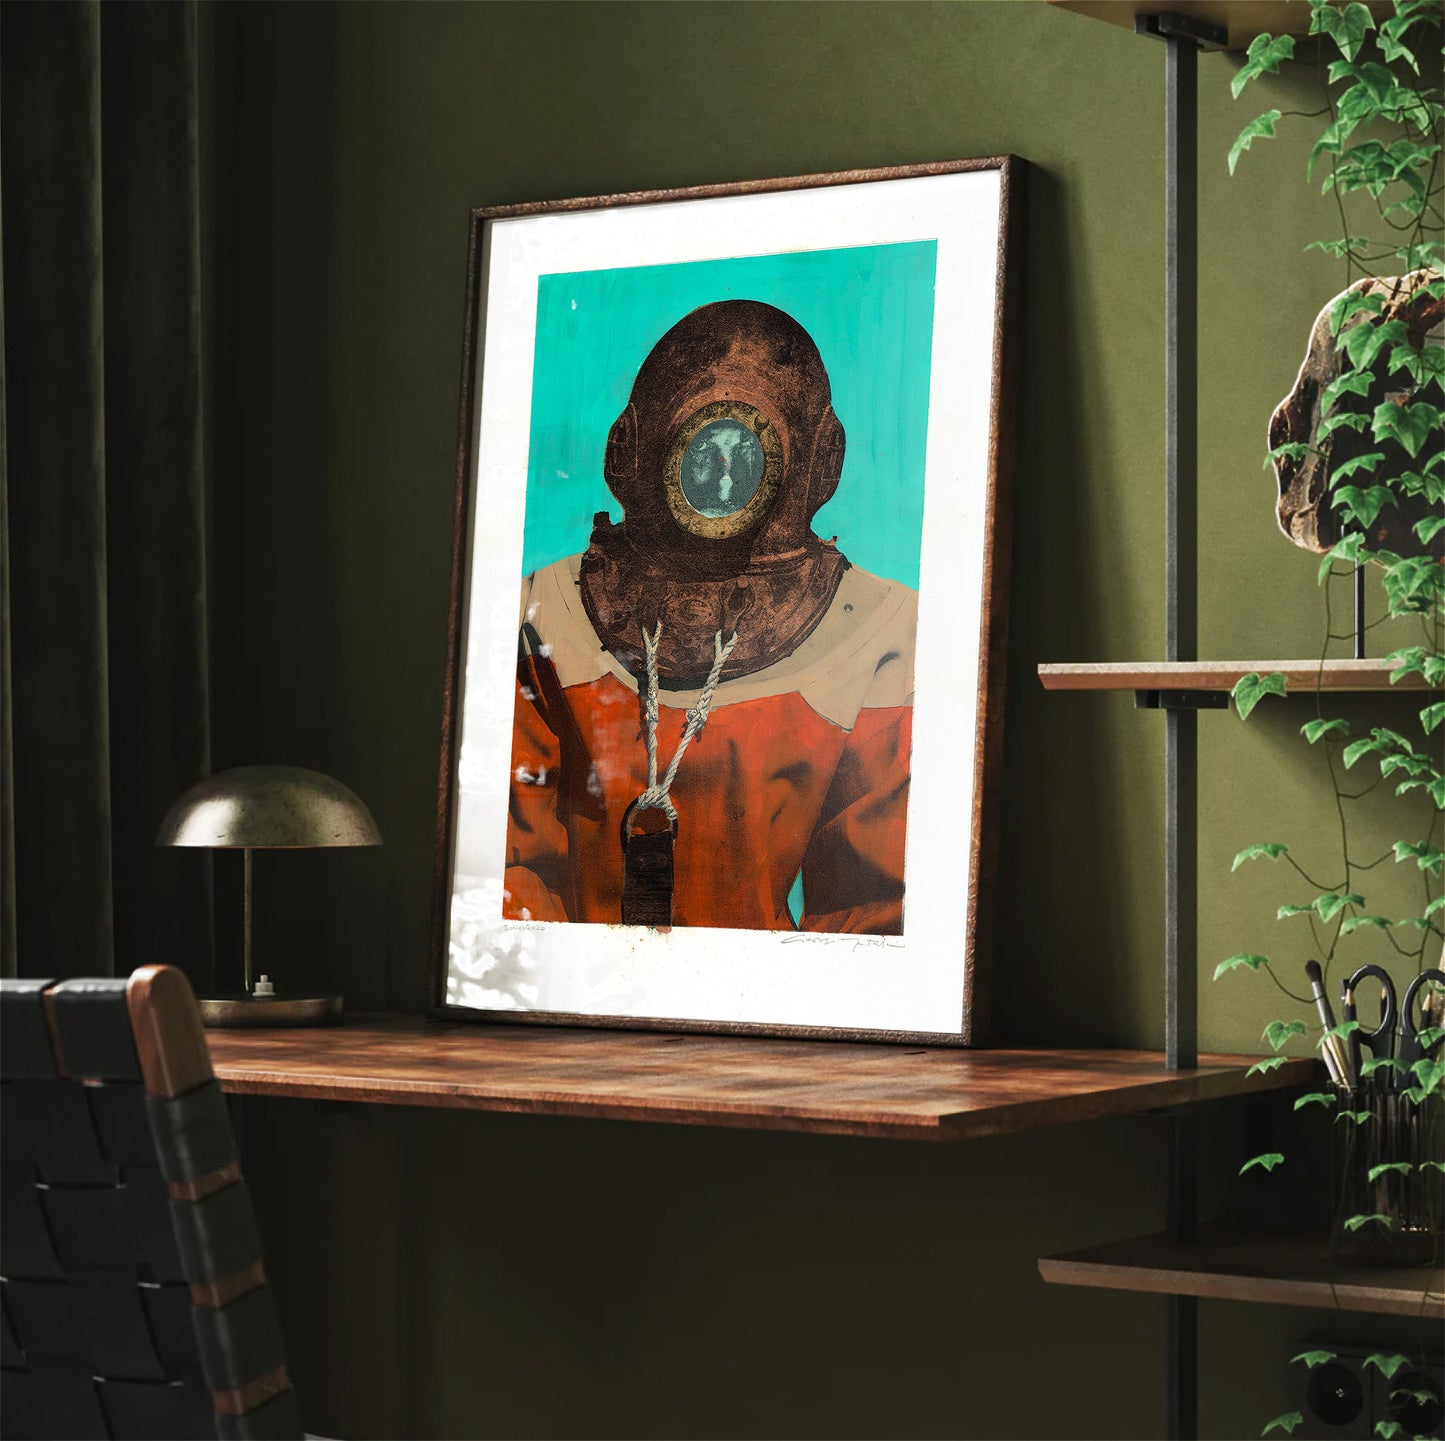 Painting Pop Art Wall Art from Greece | Flat Turquoise sponge diver from Kalymnos island, by George Tatakis - Framed Poster